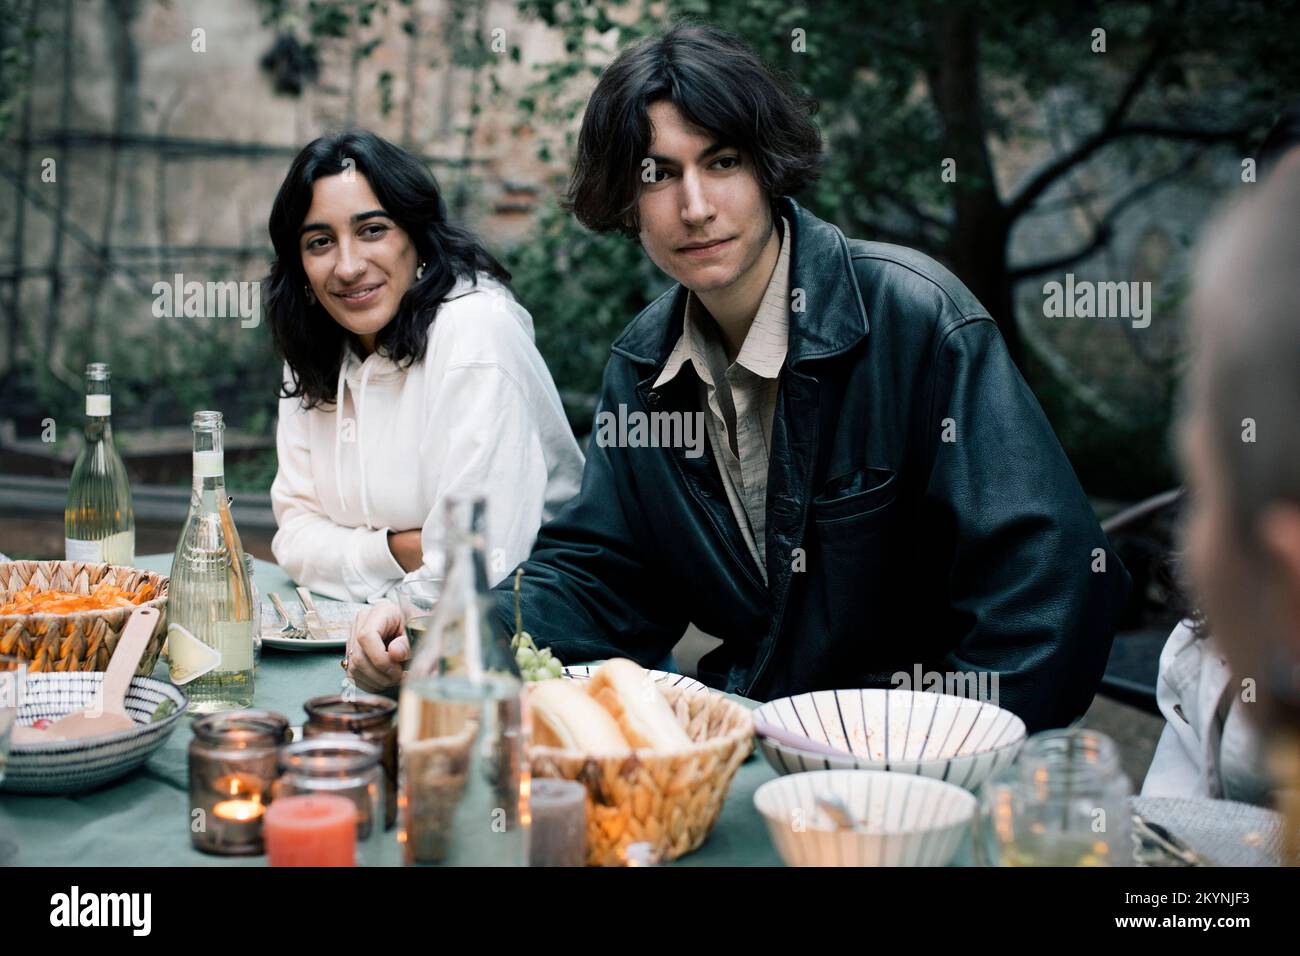 Man wearing leather jacket sitting with female friend during dinner party Stock Photo